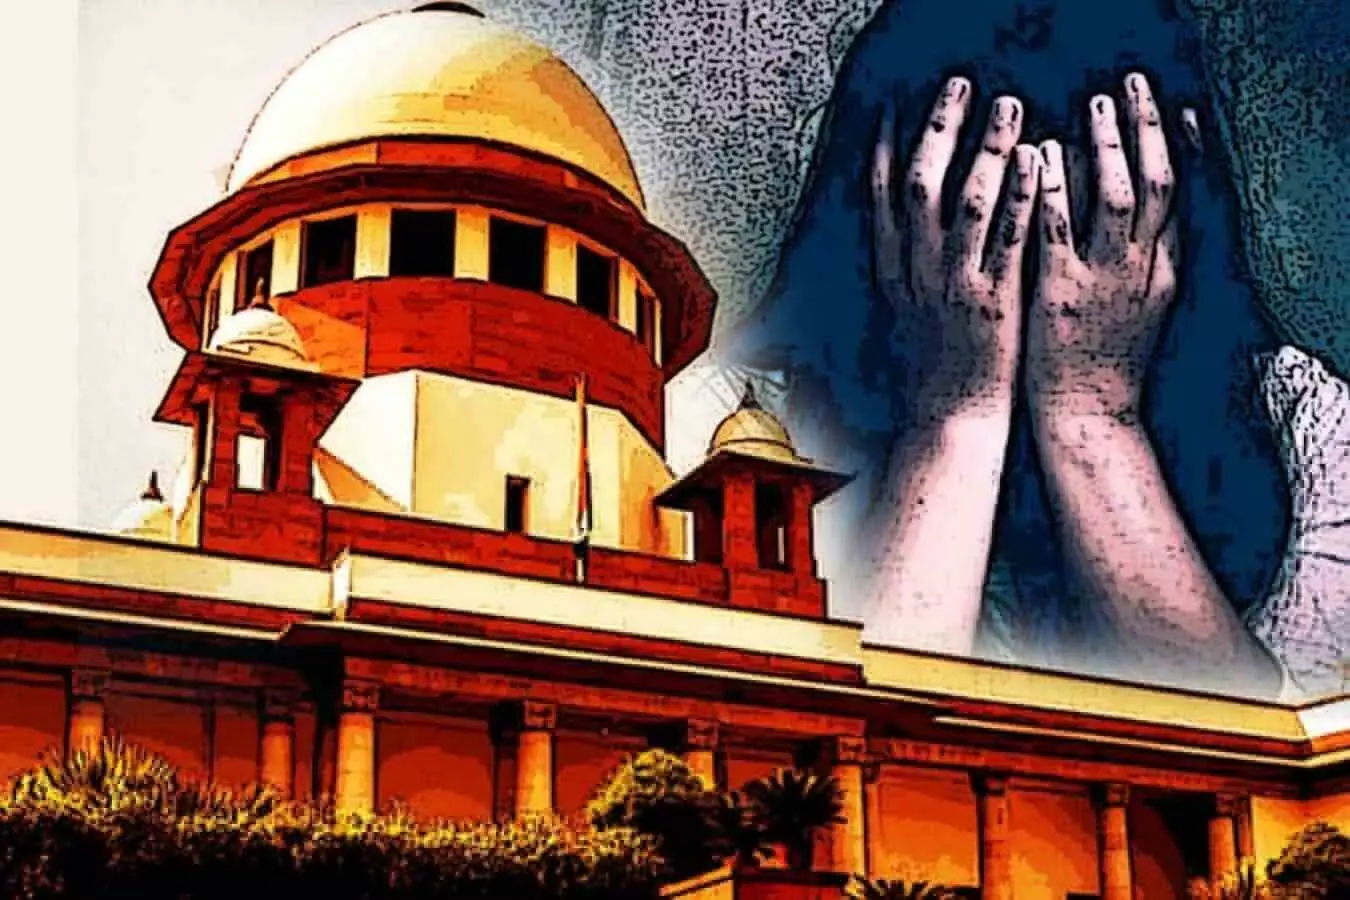 chhawla rape case 2012 sc release after death sentence more violence than nirbhaya victim mother anger